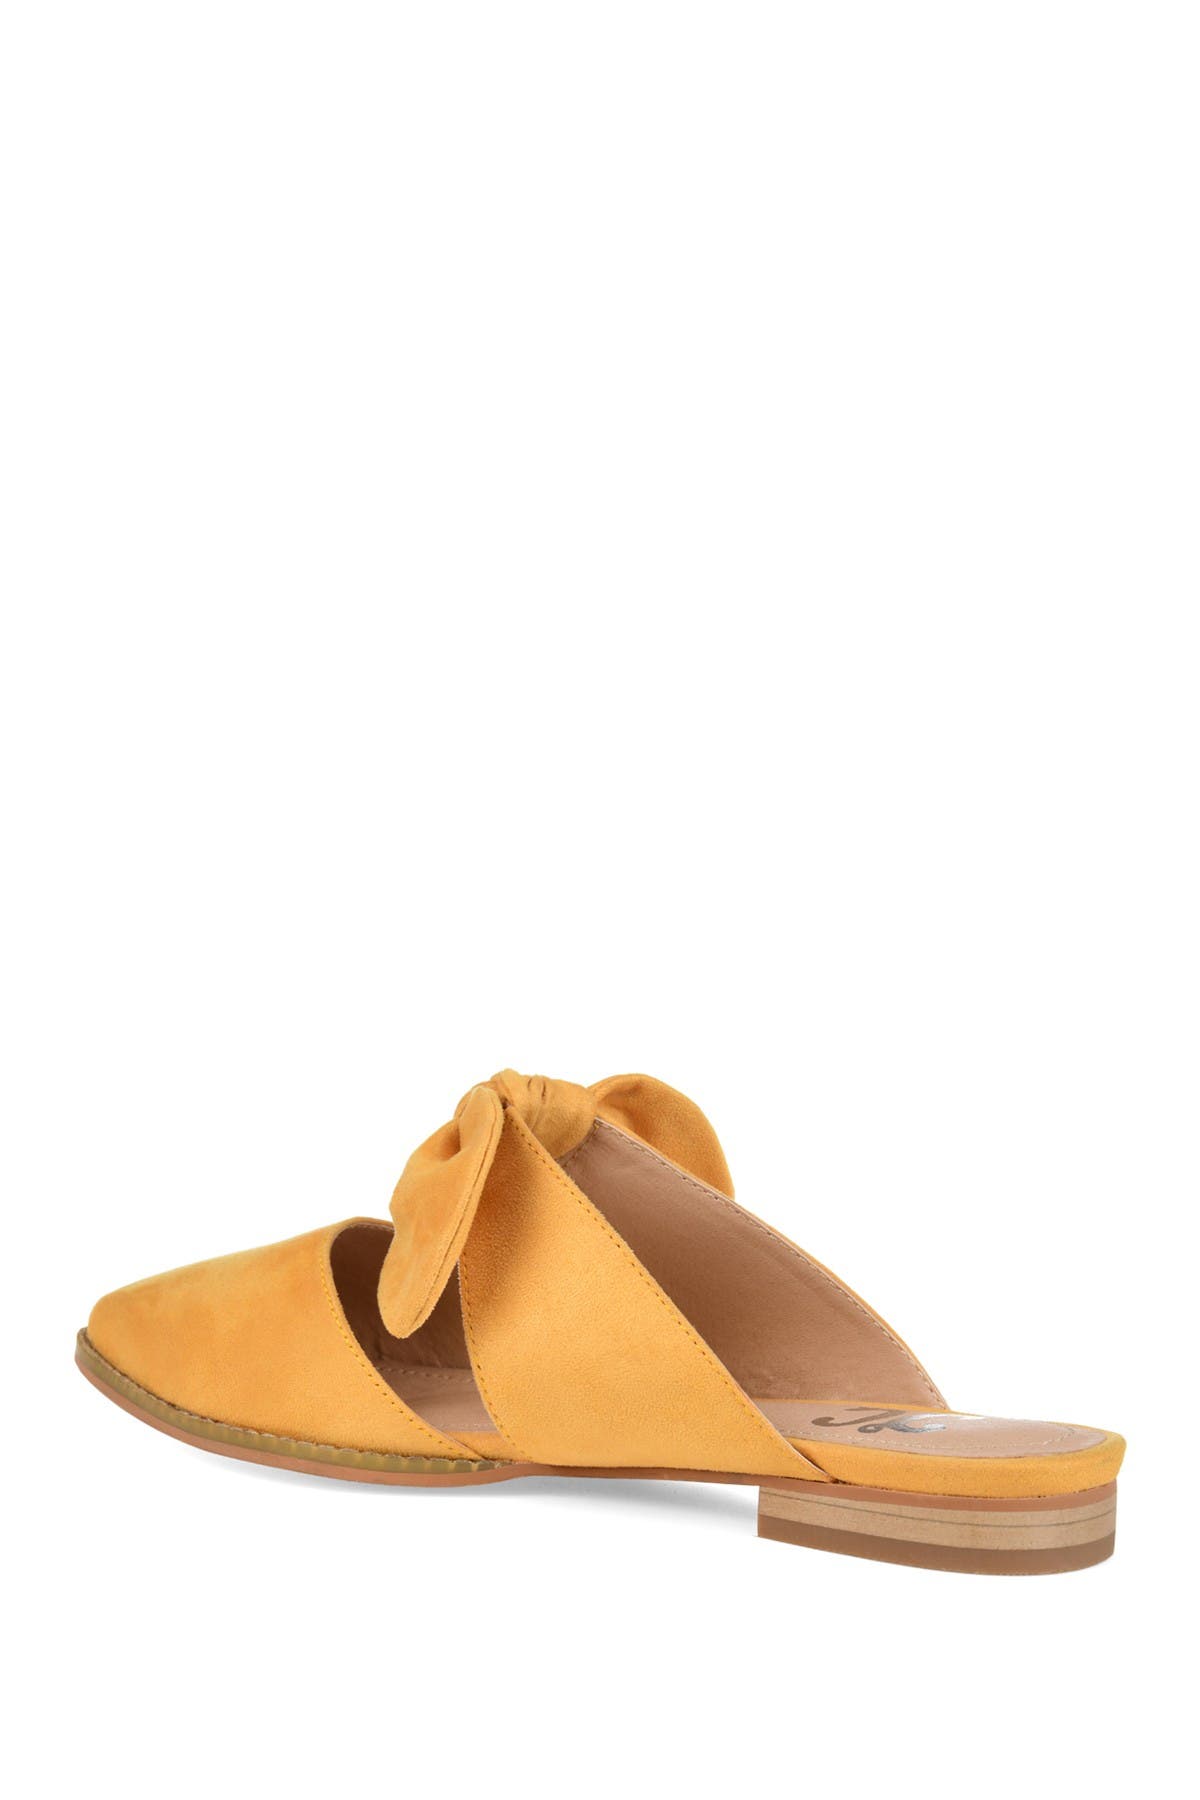 Journee Collection Telulah Bow Mule In Dark Yellow